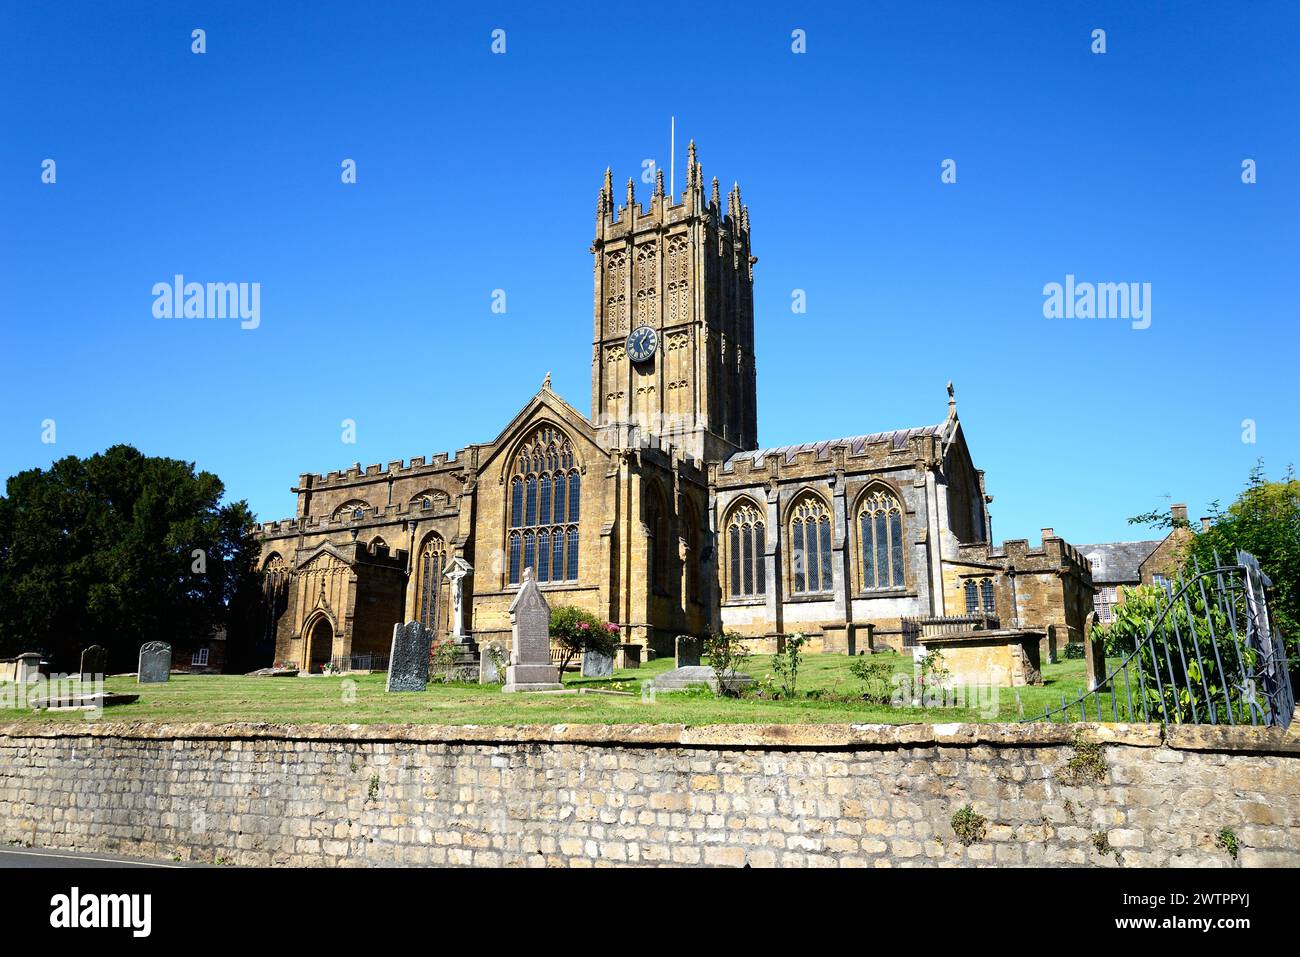 Front view of St Marys Minster Church in the town centre with the graveyard in the foreground, Ilminster, Somerset, UK, Europe. Stock Photo